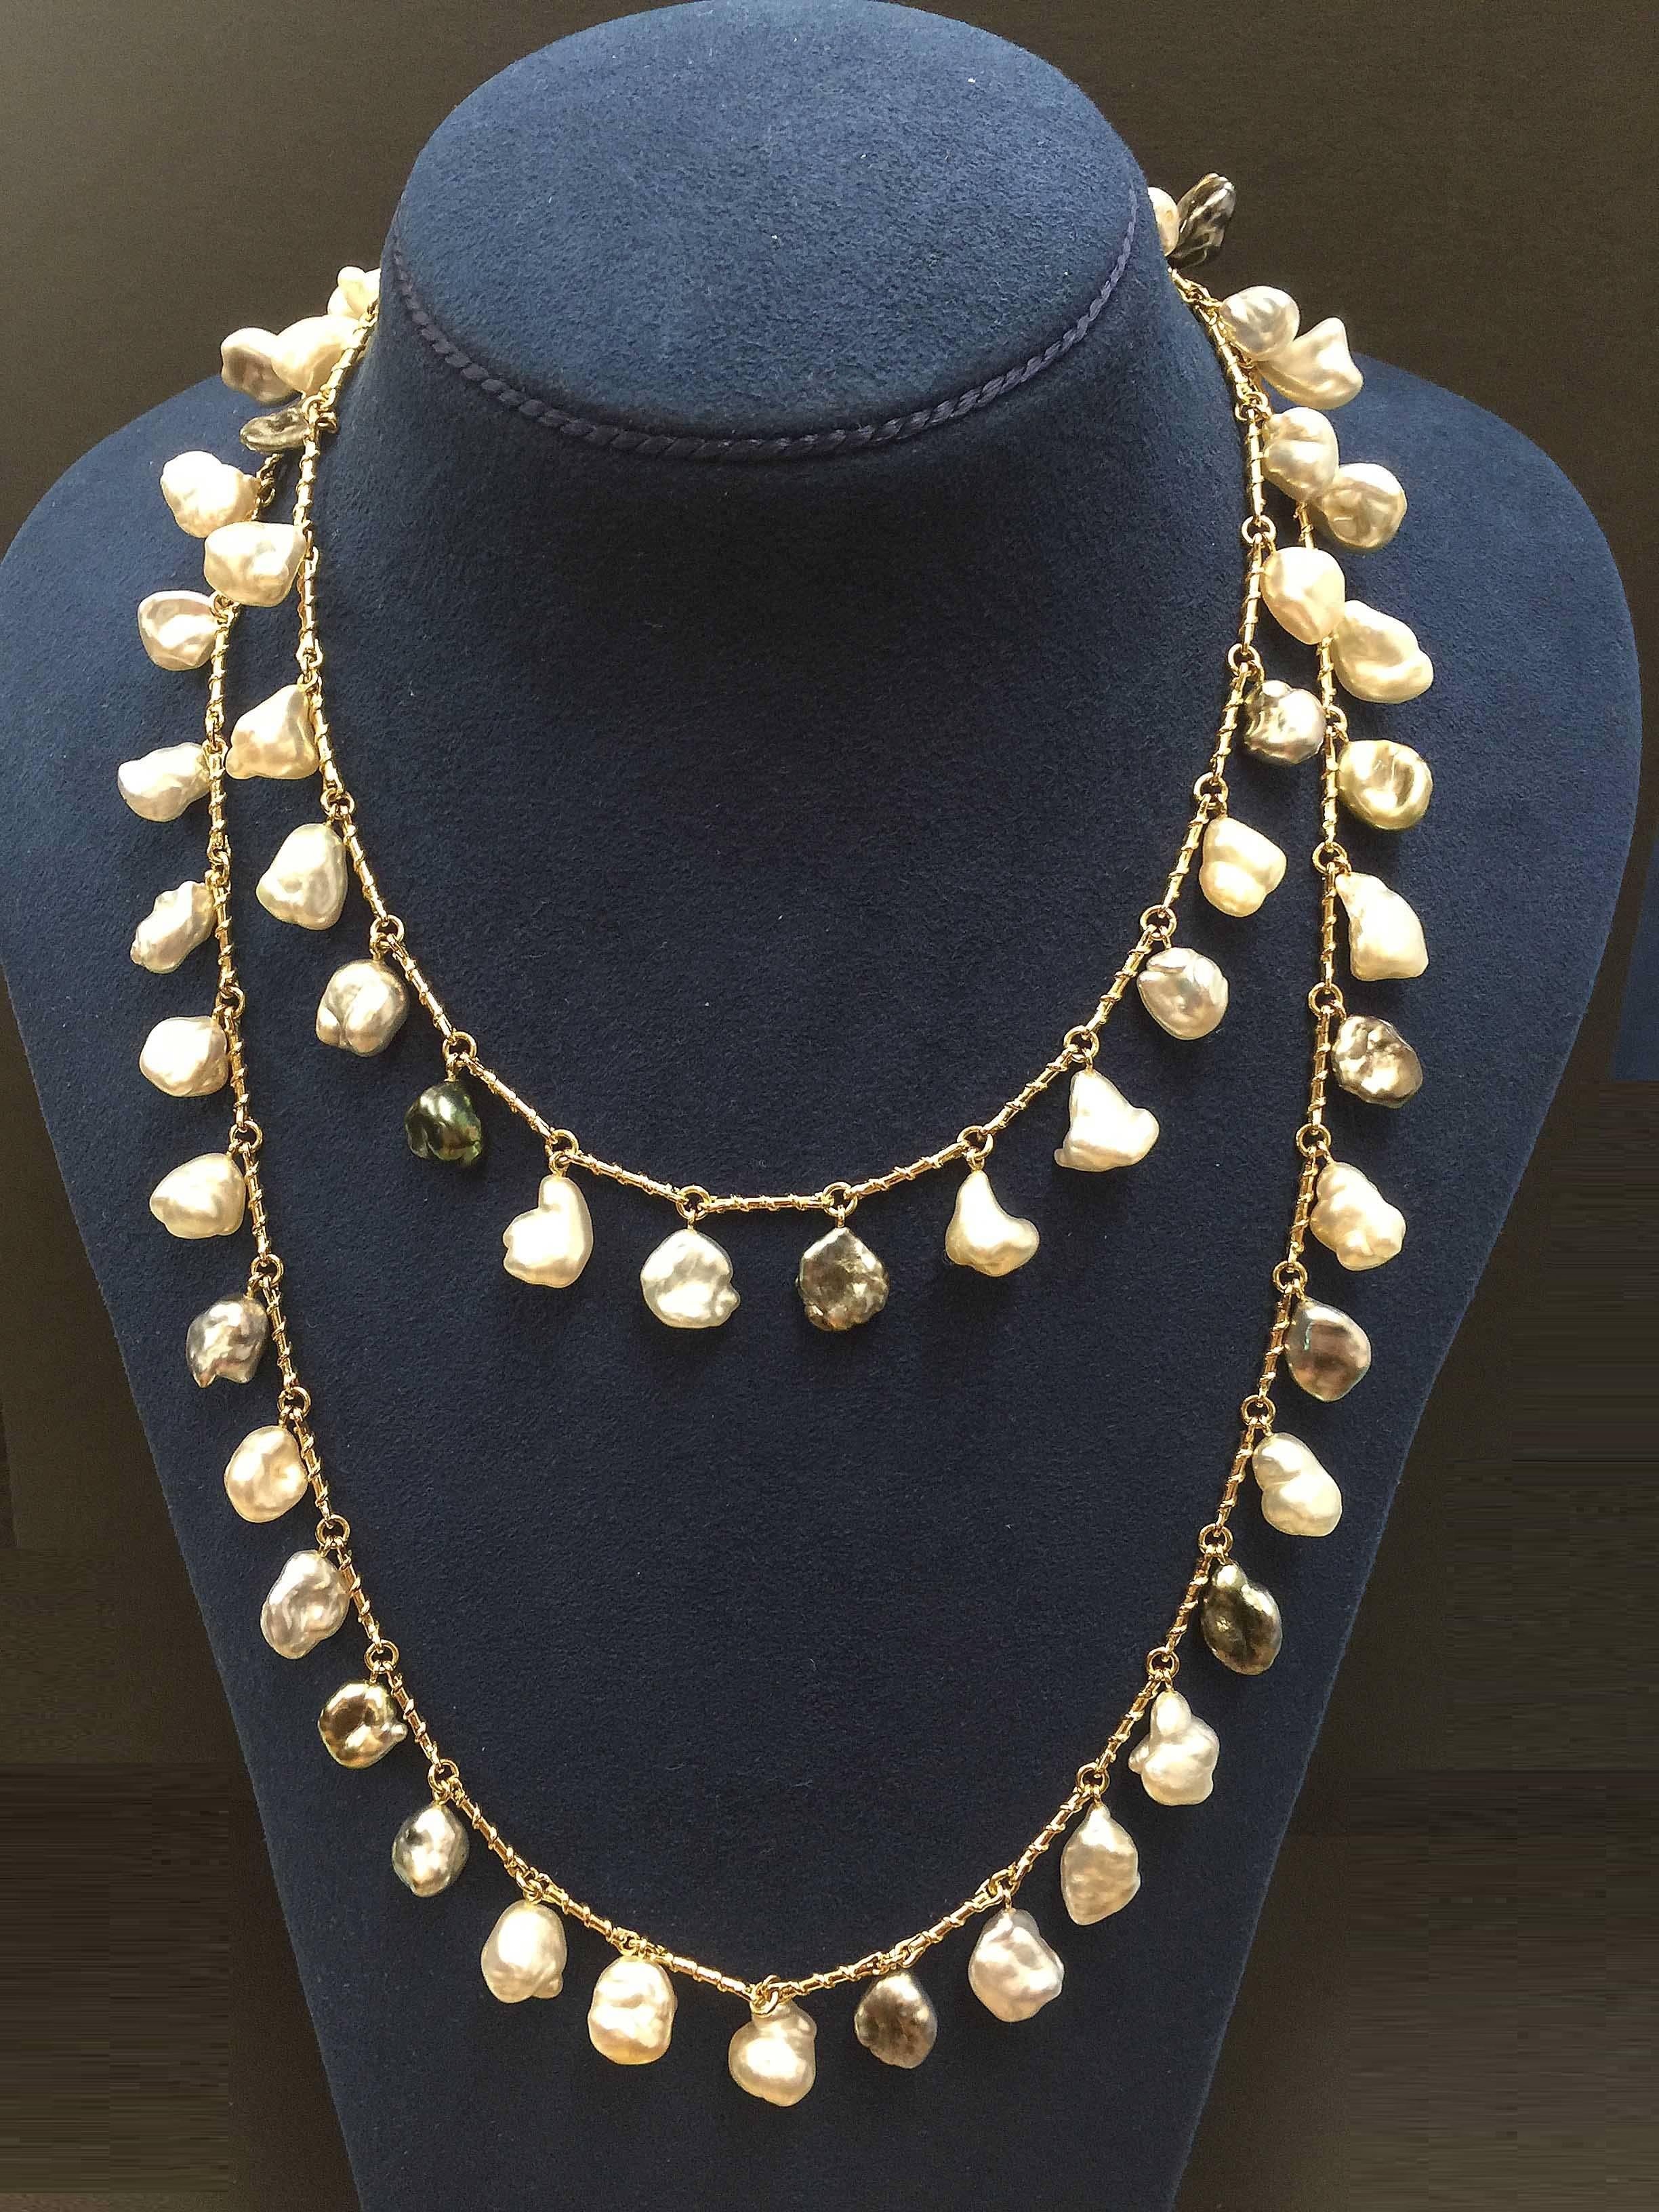 This unique necklace features various of colors of Keshi Pearls dangling with special designed twisted wire gold links. This necklace design allows for a bold statement of personal style – no matter the hour or occasion. The necklace is finished in